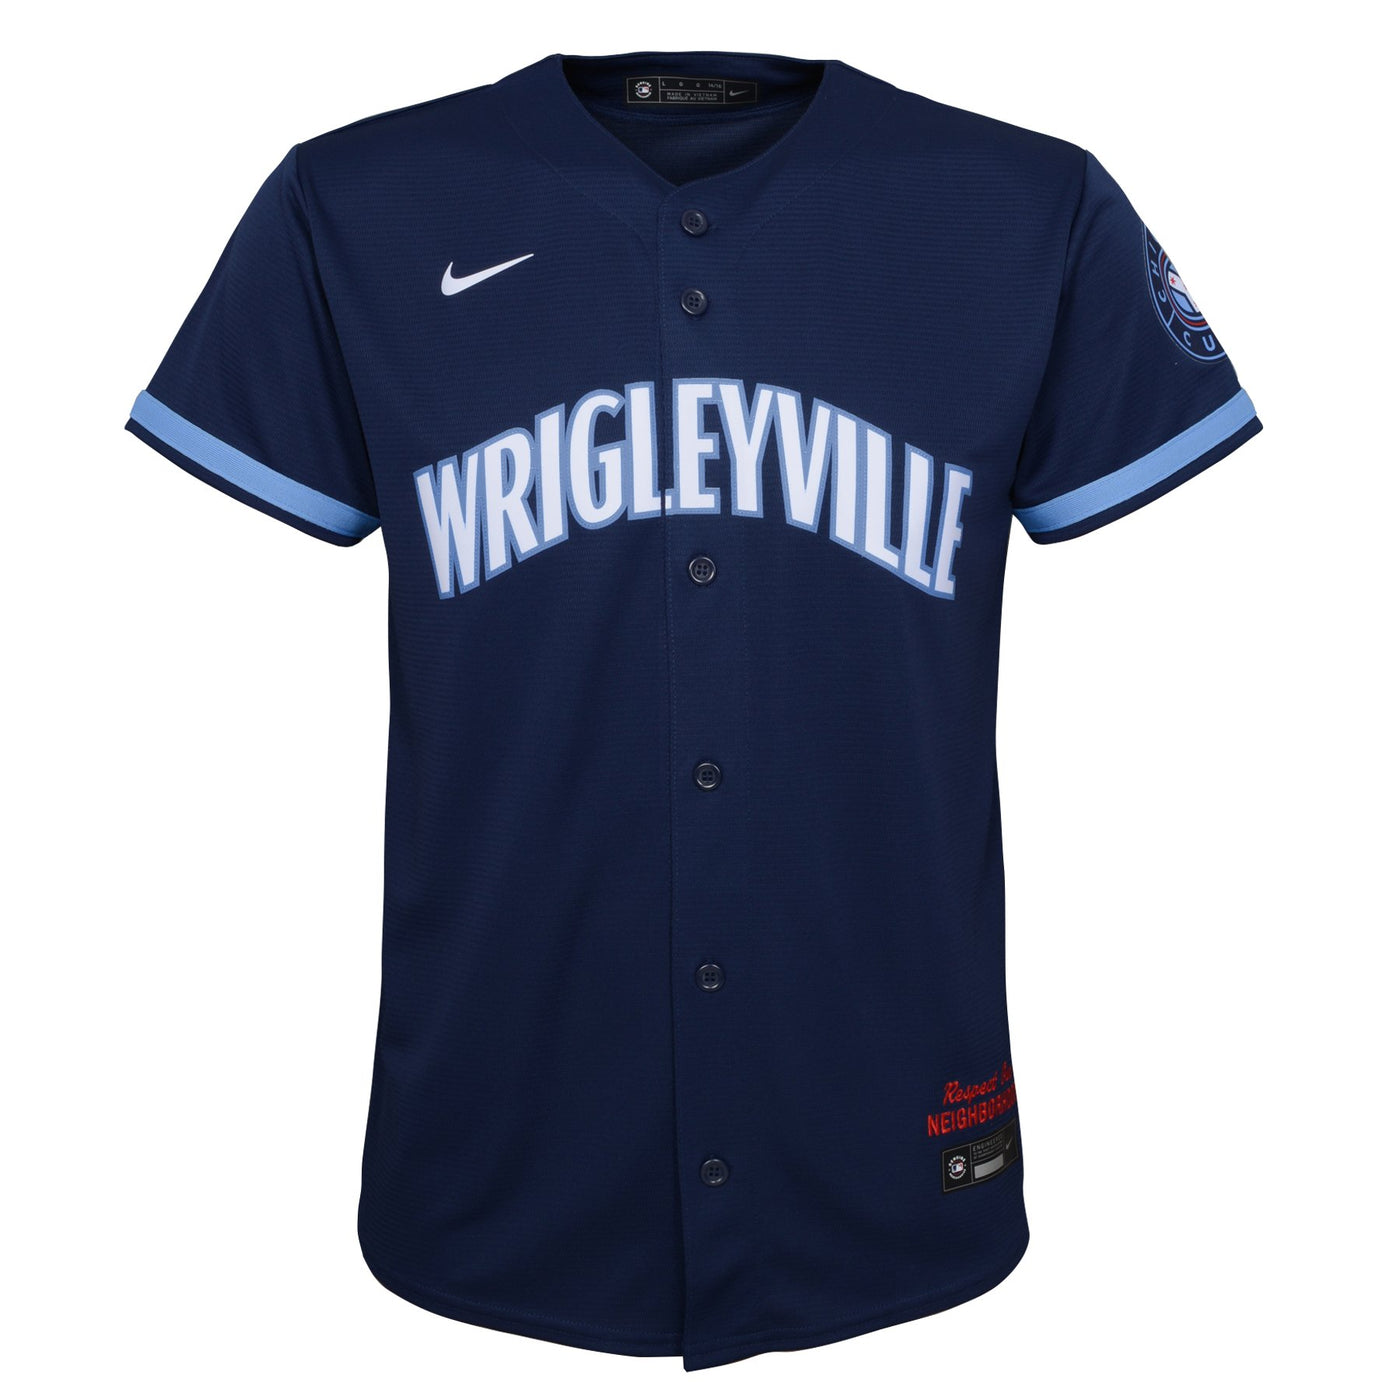 Cubs to bring back Wrigleyville jerseys, celebrate Chicago's